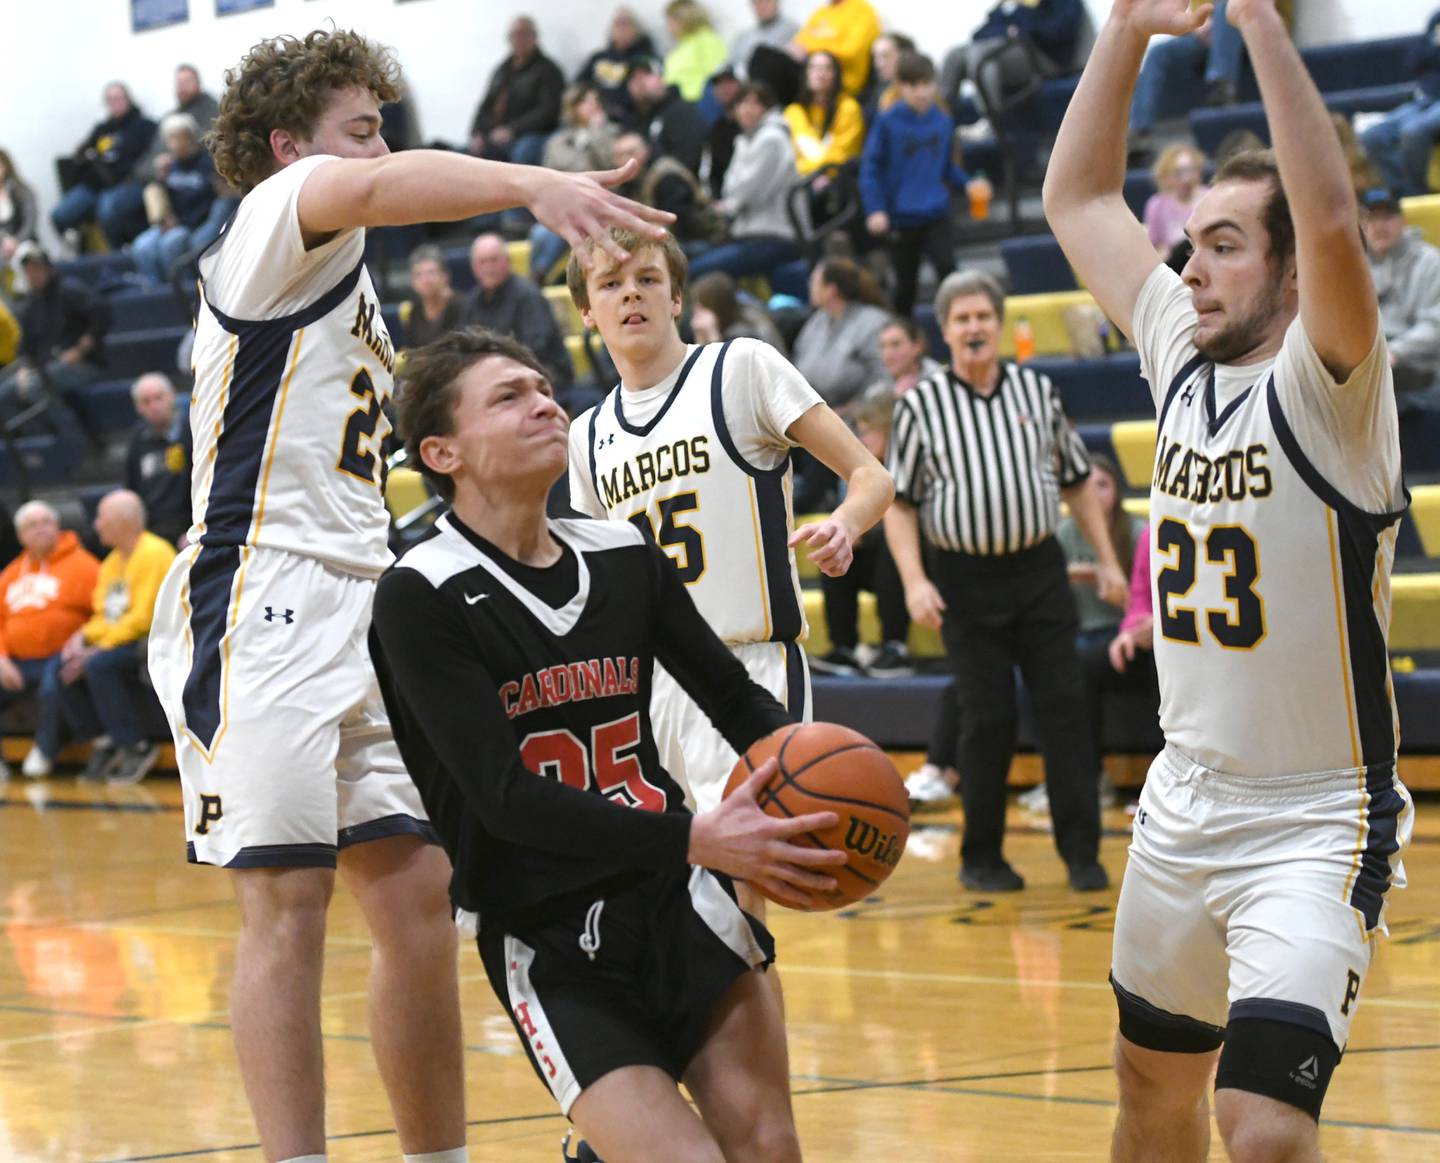 Forreston's Kendall Erdmann drives to the basket as Polo's Brady Wolber (22) and Cayden Webster (23) defend during a NUIC game in Polo on Thursday, Jan. 19.